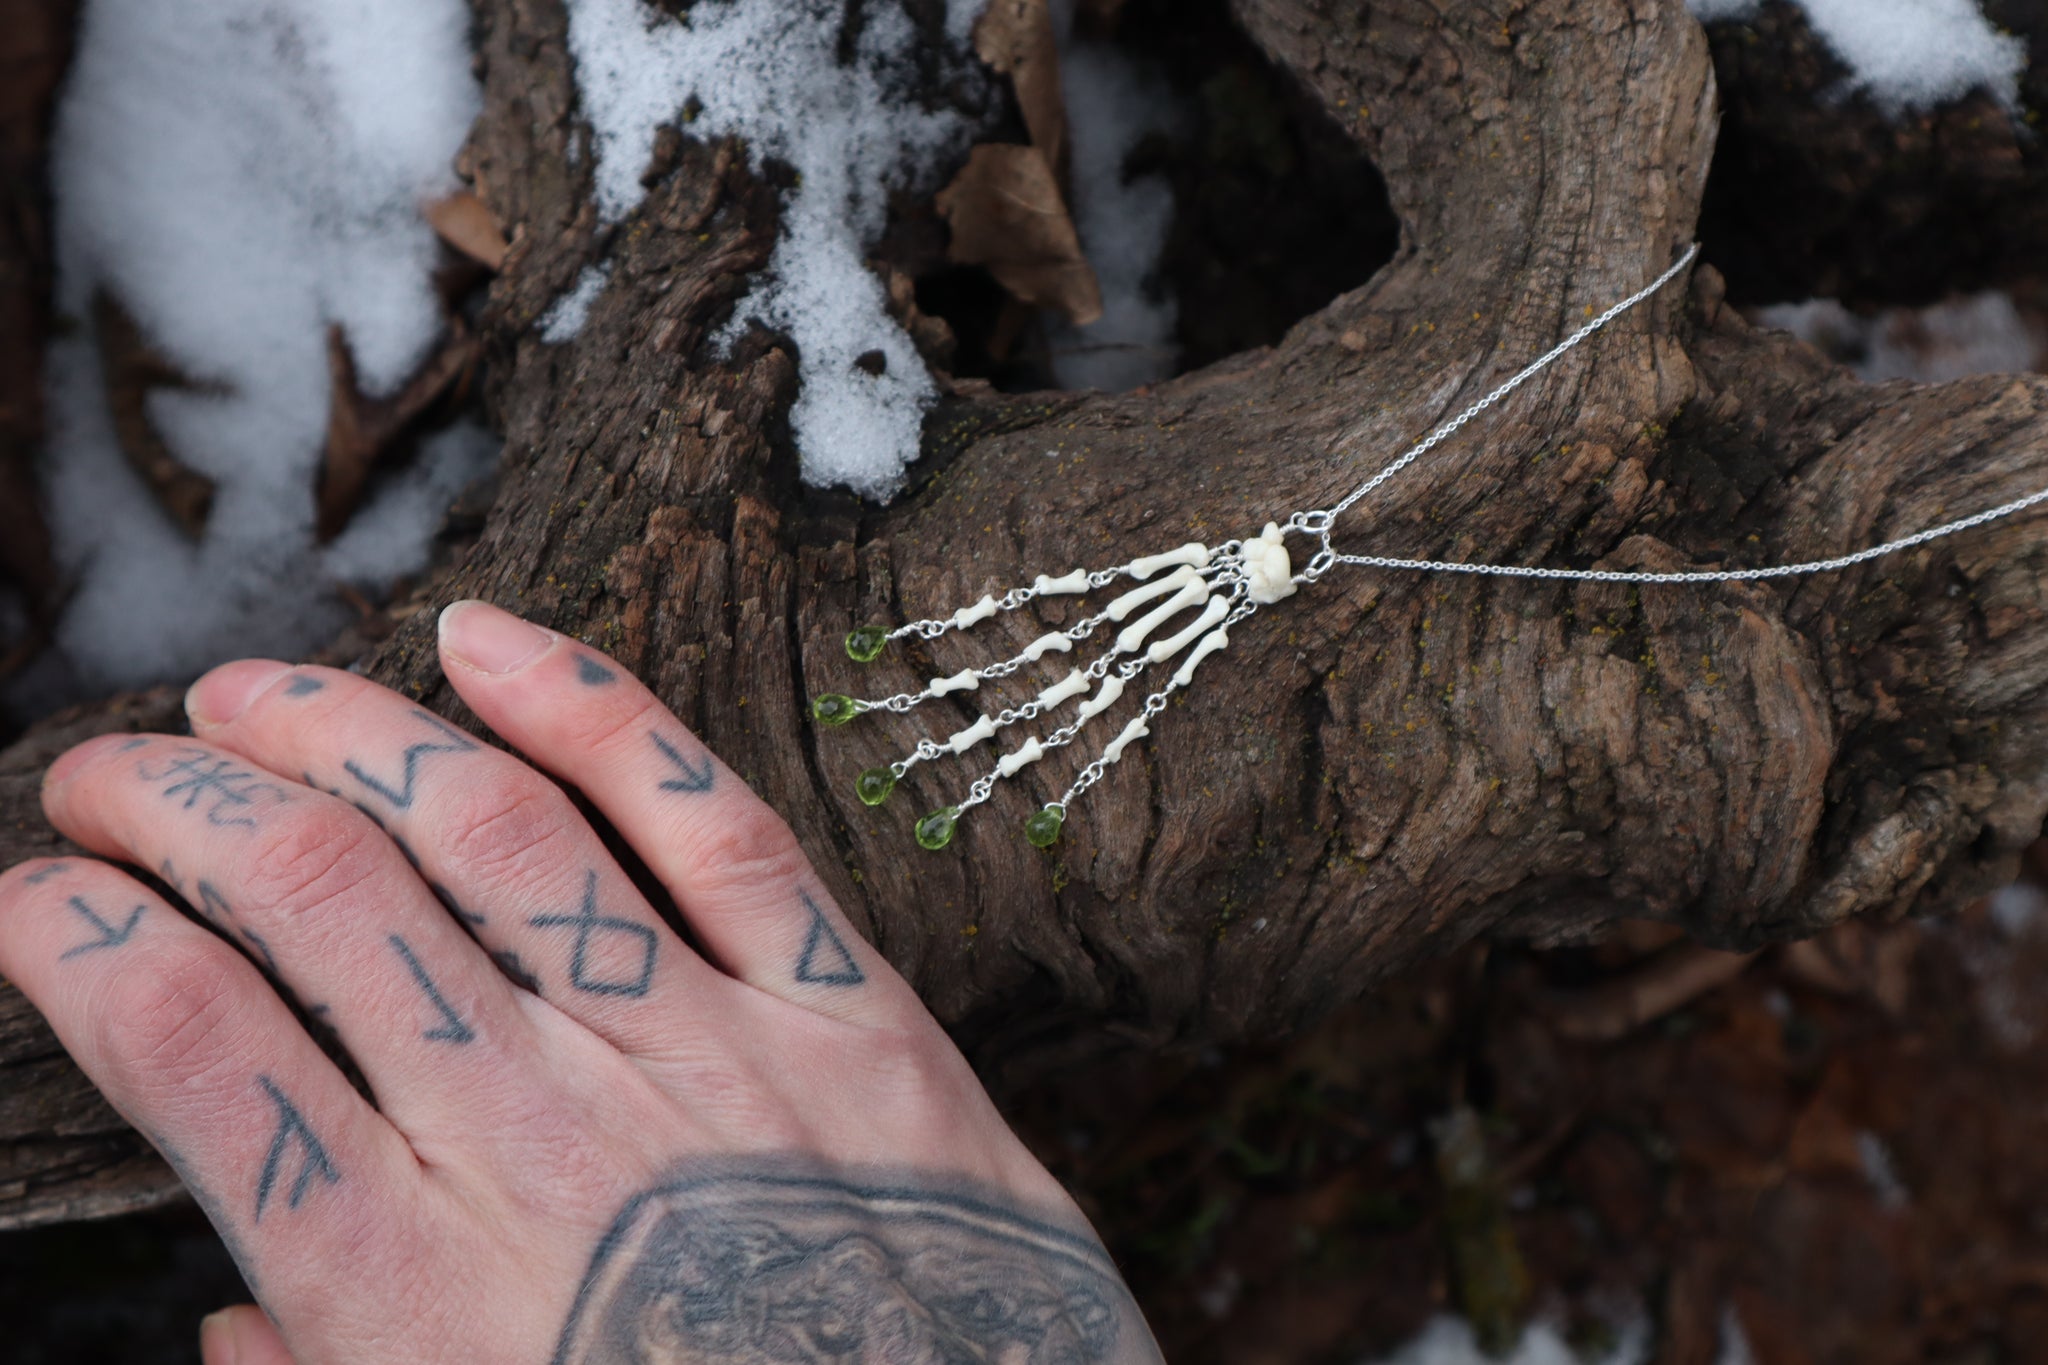 Fluid Striped Skunk Paw Articulation Necklace with Peridot “Claws”